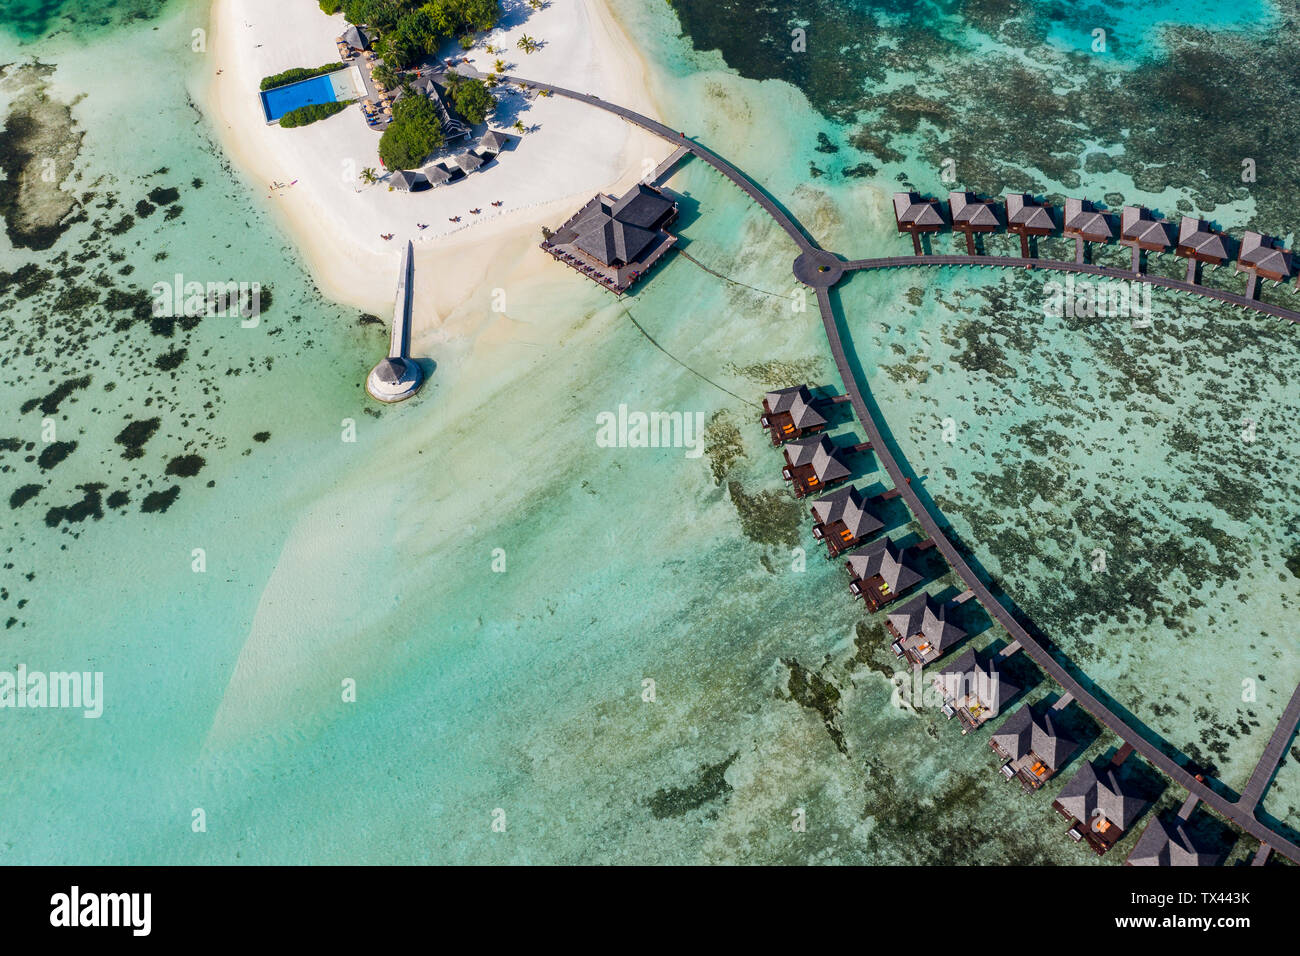 Maldives, South Male Atoll, aerial view of resort with bungalows on island Olhuveli Stock Photo